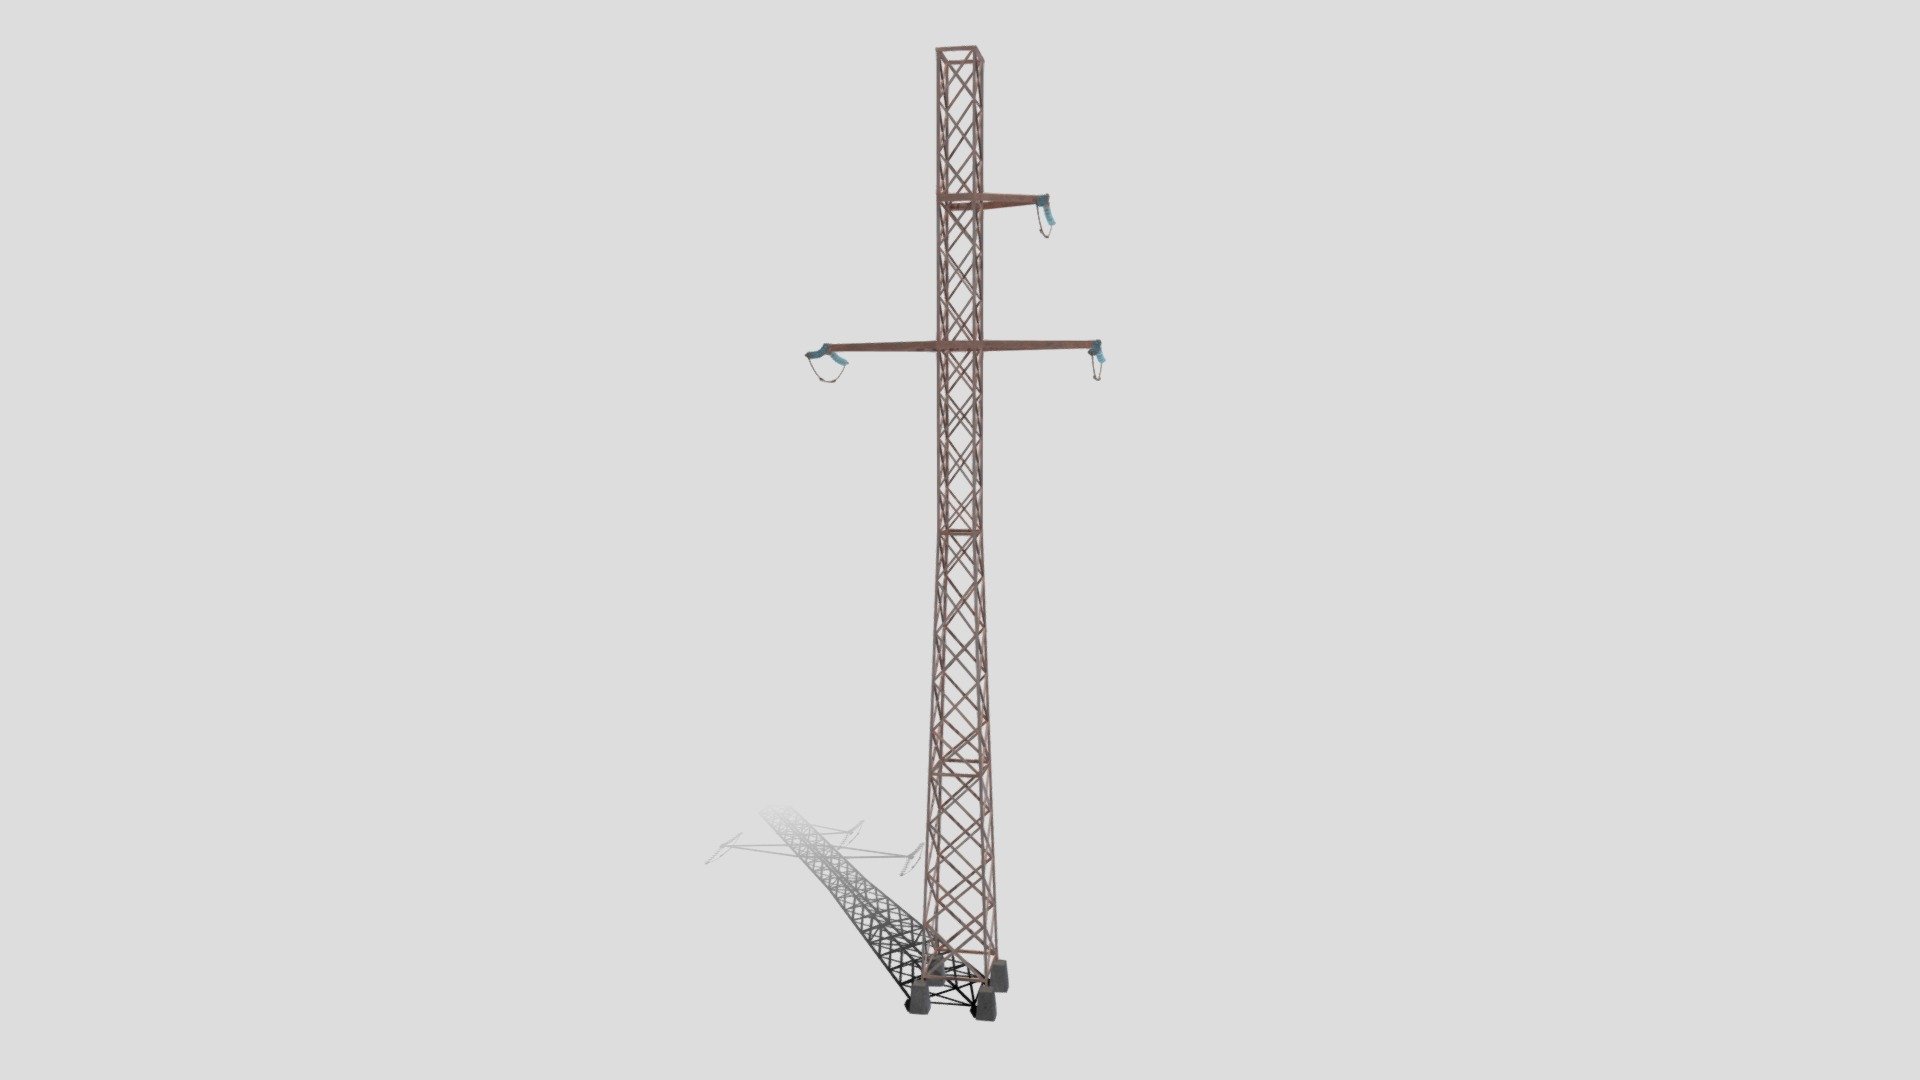 Electricity pole model built in Blender and rendered with Cycles, with PBR materials, Game-Ready.

File formats:
-.blend, rendered with cycles, as seen in the images;
-.obj, with materials applied and textures;
-.dae, with materials applied and textures;
-.fbx, with material slots applied;
-.stl;

3D Software:
This 3d model was originally created in Blender 2.79 and rendered with Cycles.

Materials and textures:
Materials and textures made in Substance Painter (PBR Workflow).
The model has materials applied in all formats, and is ready to import and render .
The model comes with multiple png image textures.

Preview scenes:
The preview images are rendered in Blender using its built-in render engine &lsquo;Cycles'.
Note that the blend files come directly with the rendering scene included and the render command will generate the exact result as seen in previews.

General:
The models are built strictly out of quads, with low poly counts, ideal for games, but also detailed enough for high fidelity renders 3d model